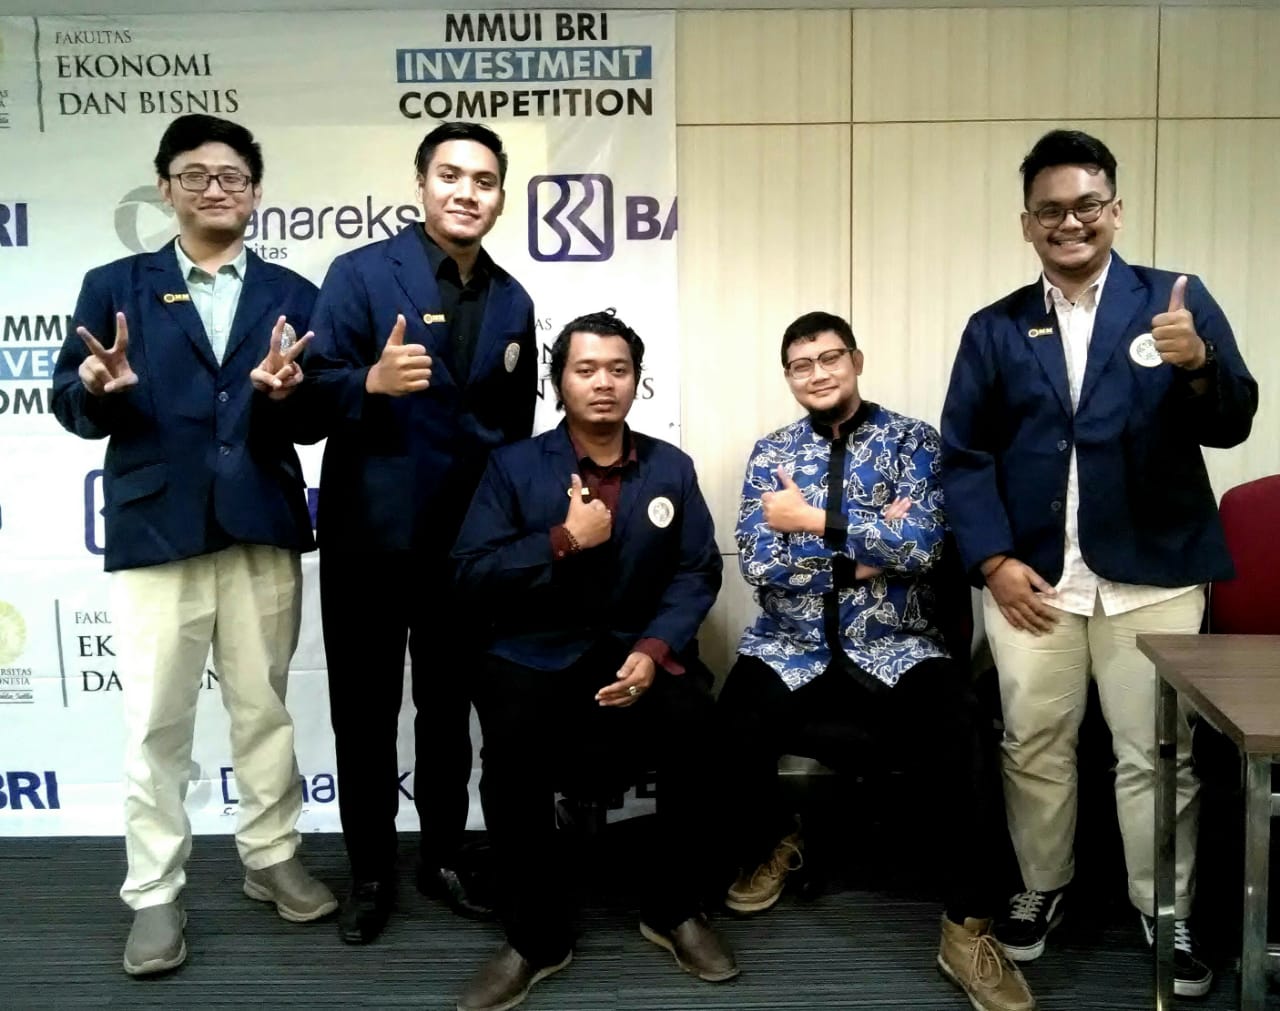 MM FEB Unair di MM UI Investment Competition 2018 b